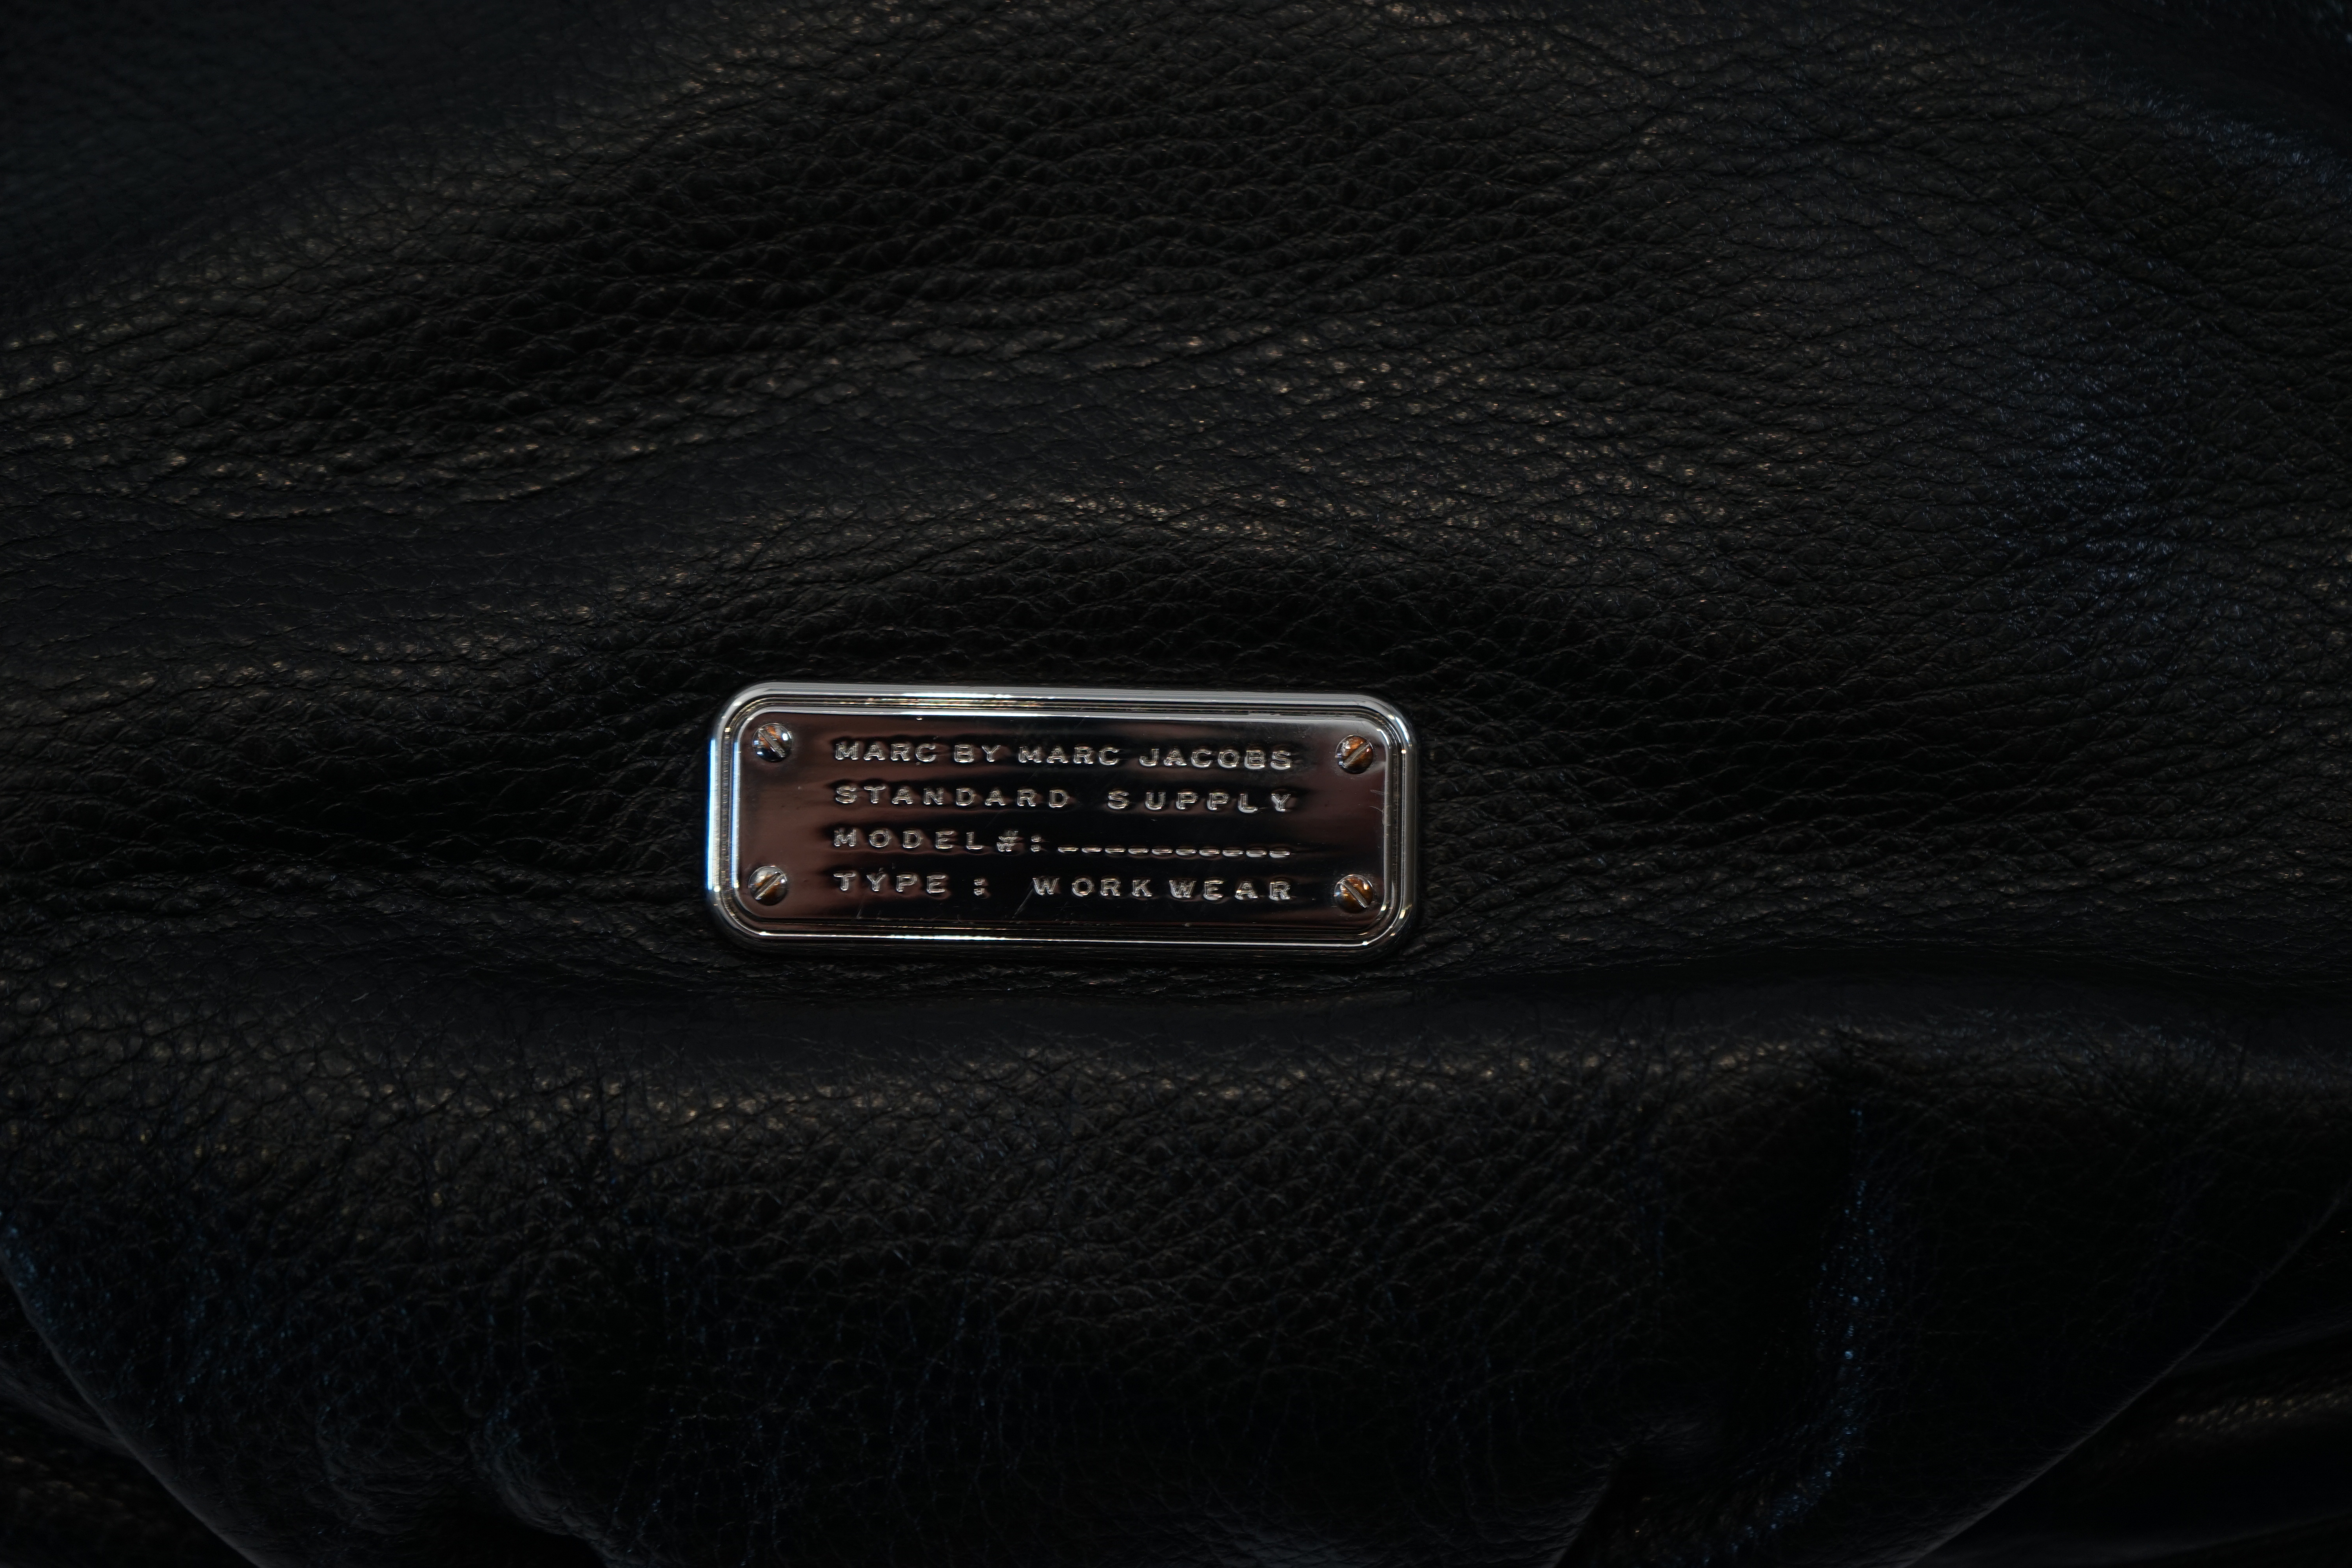 A Marc Jacobs black leather boho with silver zip detail, width 40cm, depth 15cm, height 35cm